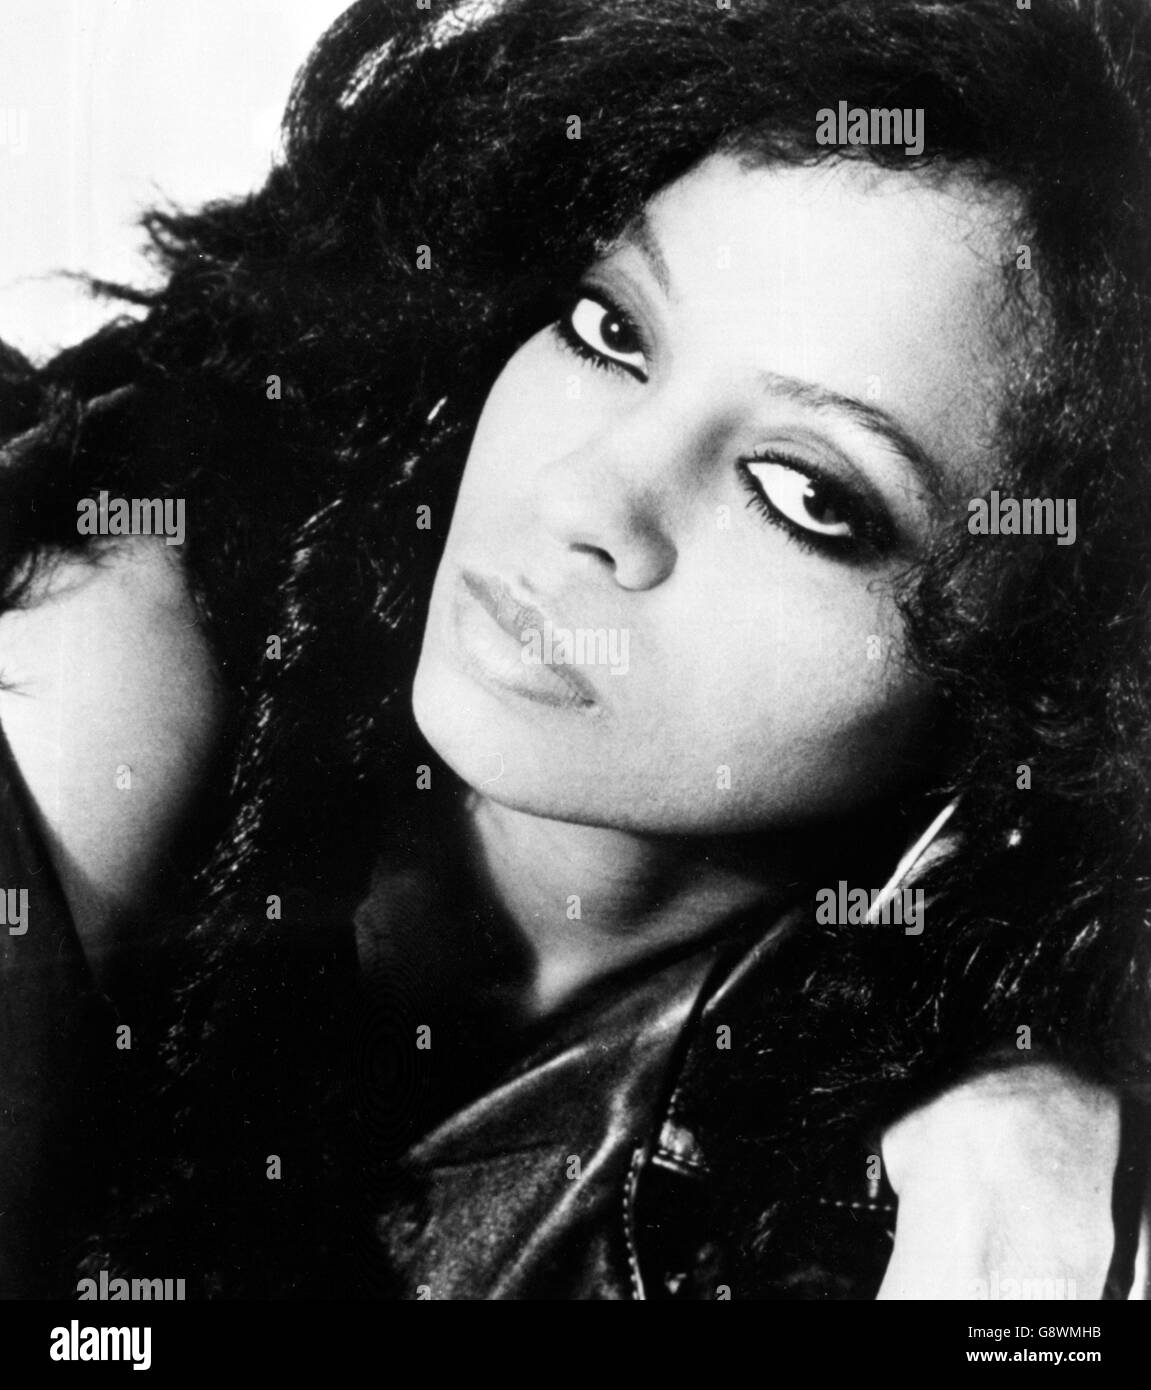 Diana ross Black and White Stock Photos & Images - Alamy